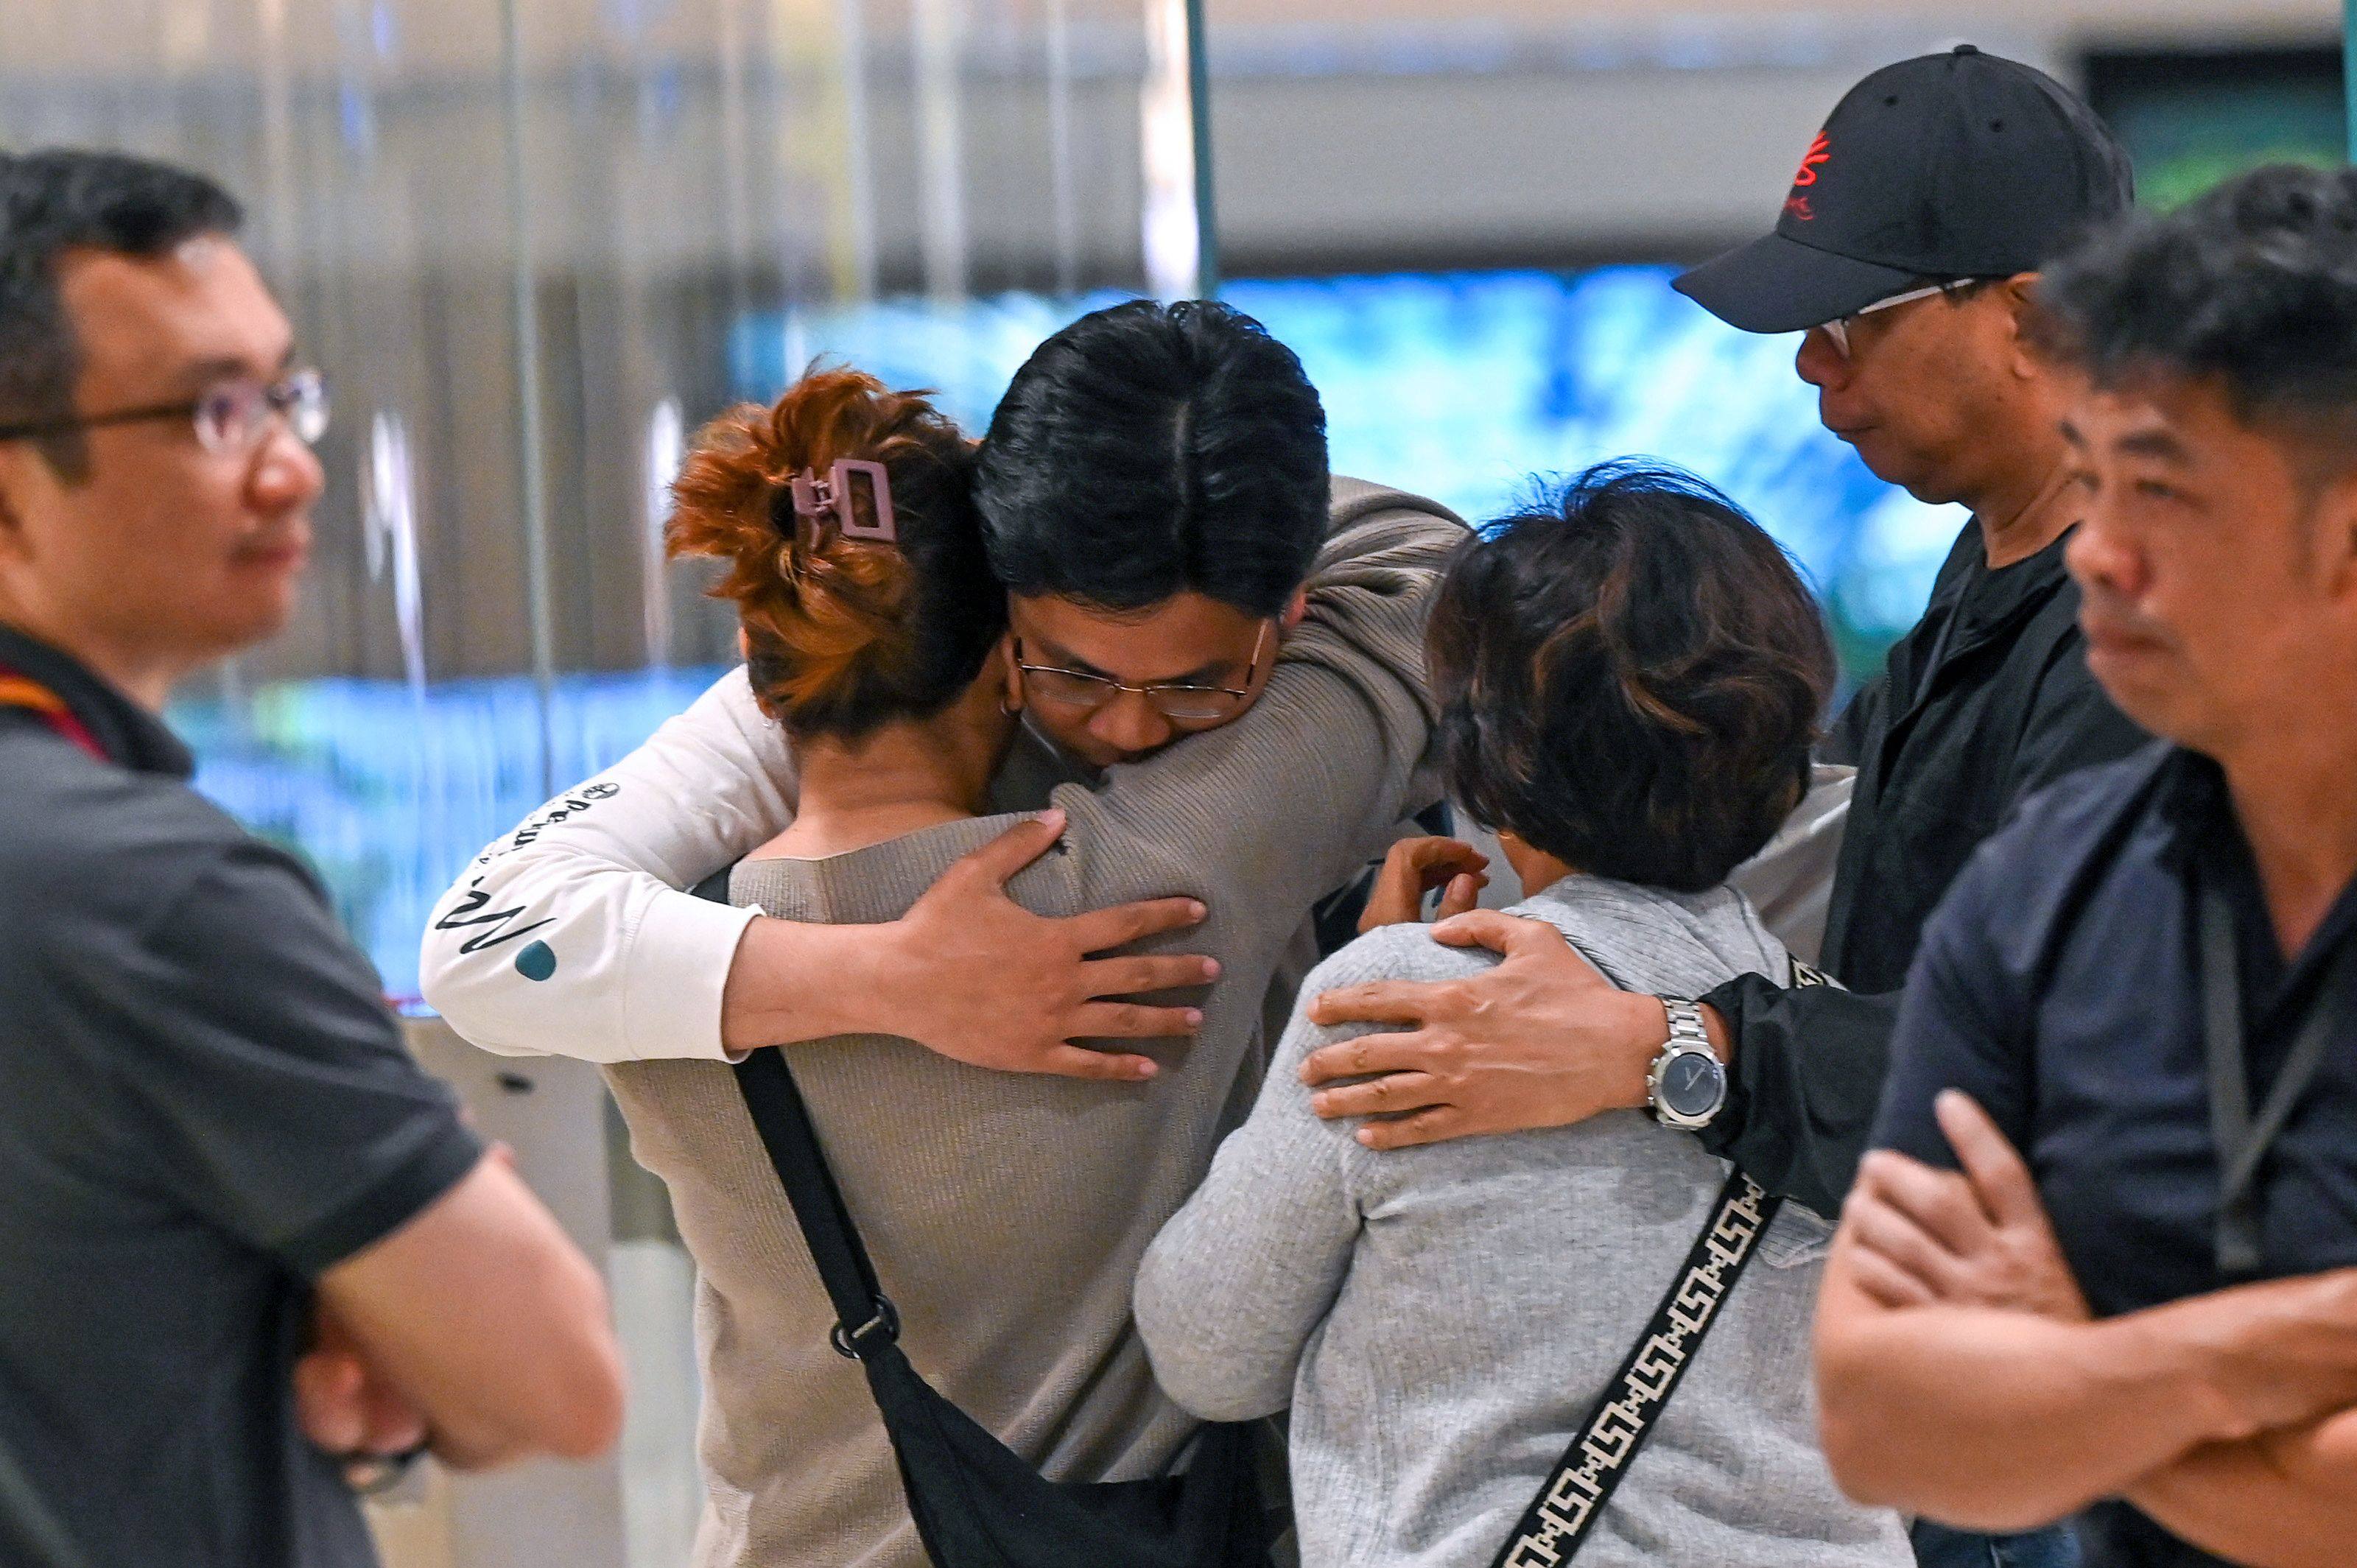 Passengers of the turbulence-hit Singapore Airlines flight greet family members upon arrival at Changi Airport in the city state on May 22. Photo: AFP